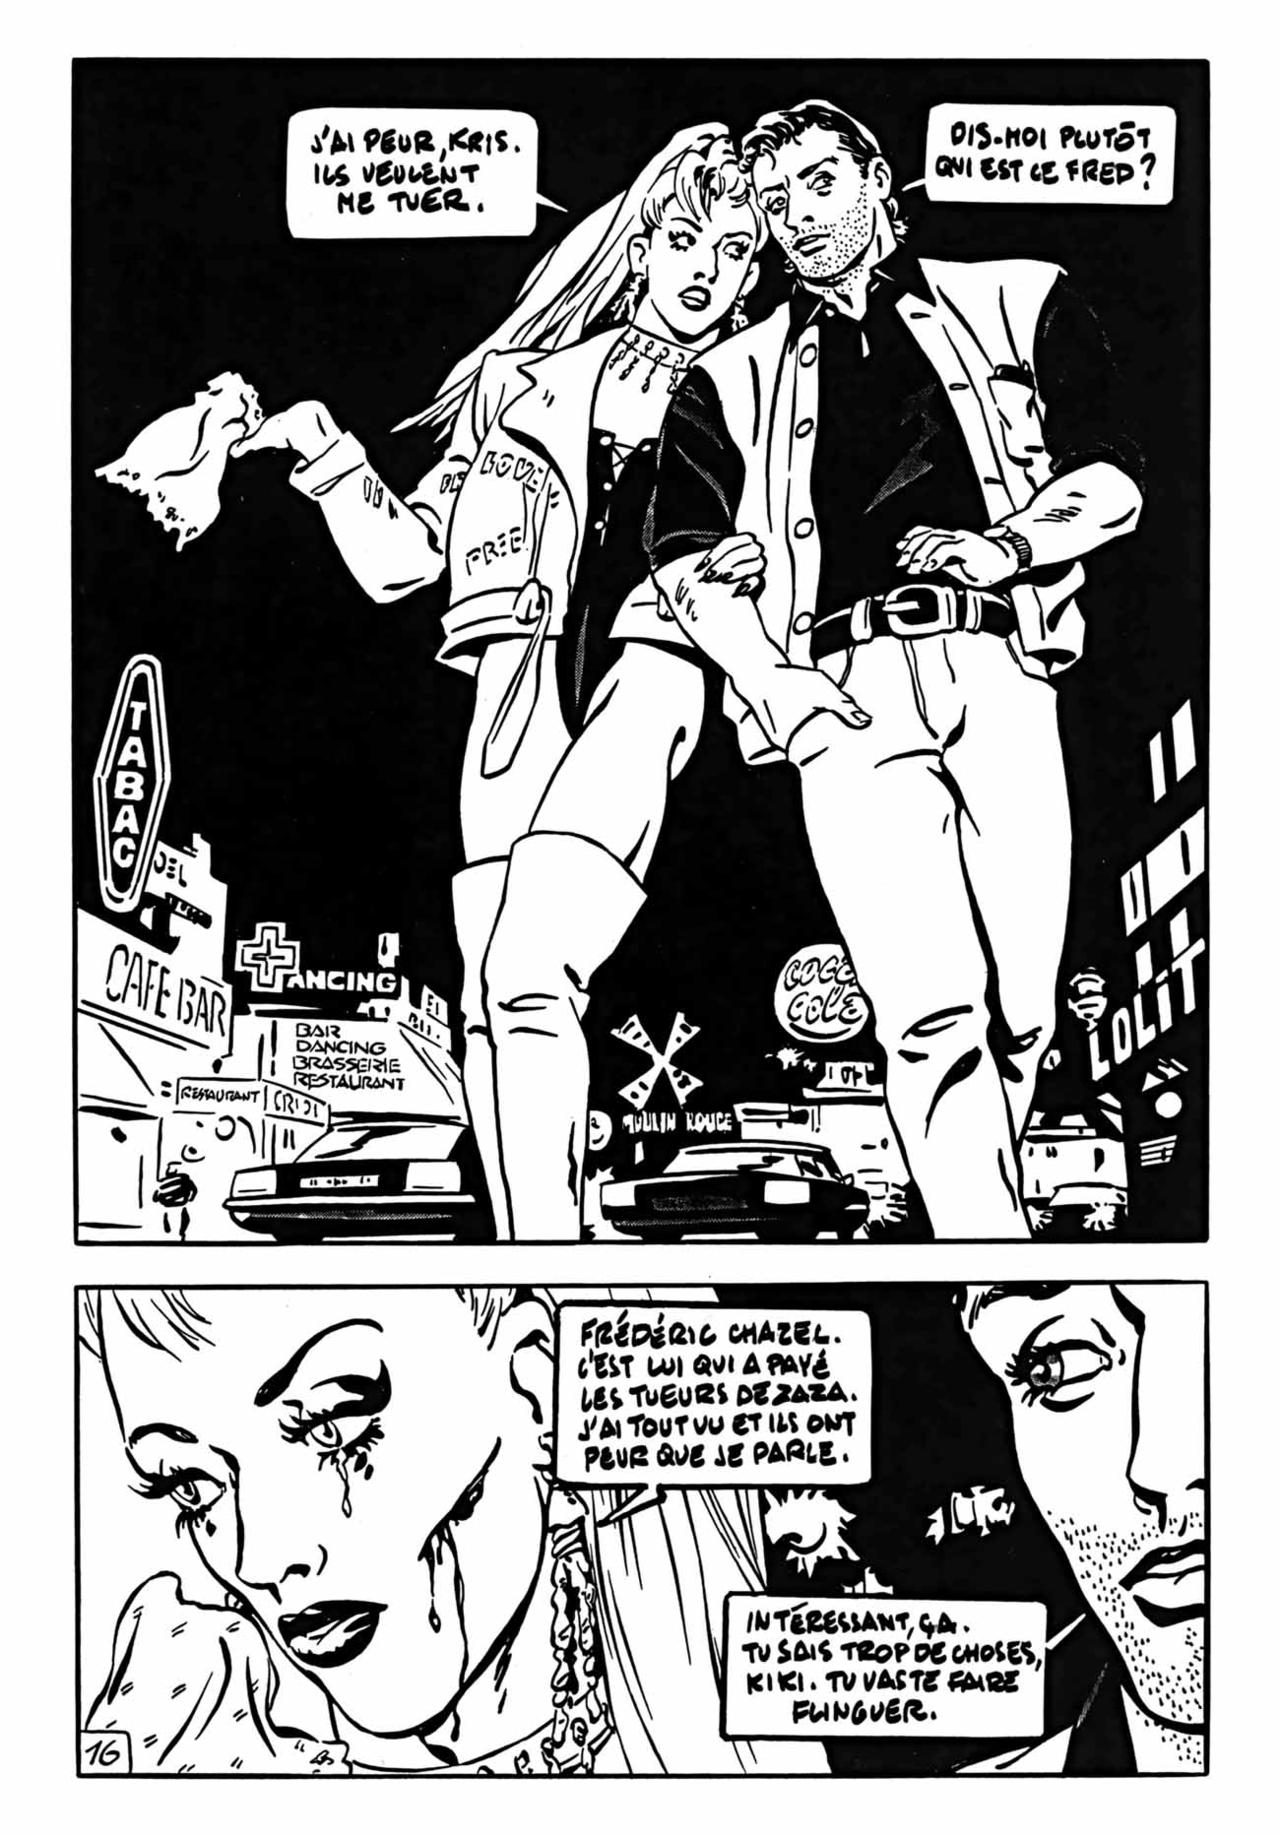 Police By Night - Volume 1 numero d'image 14